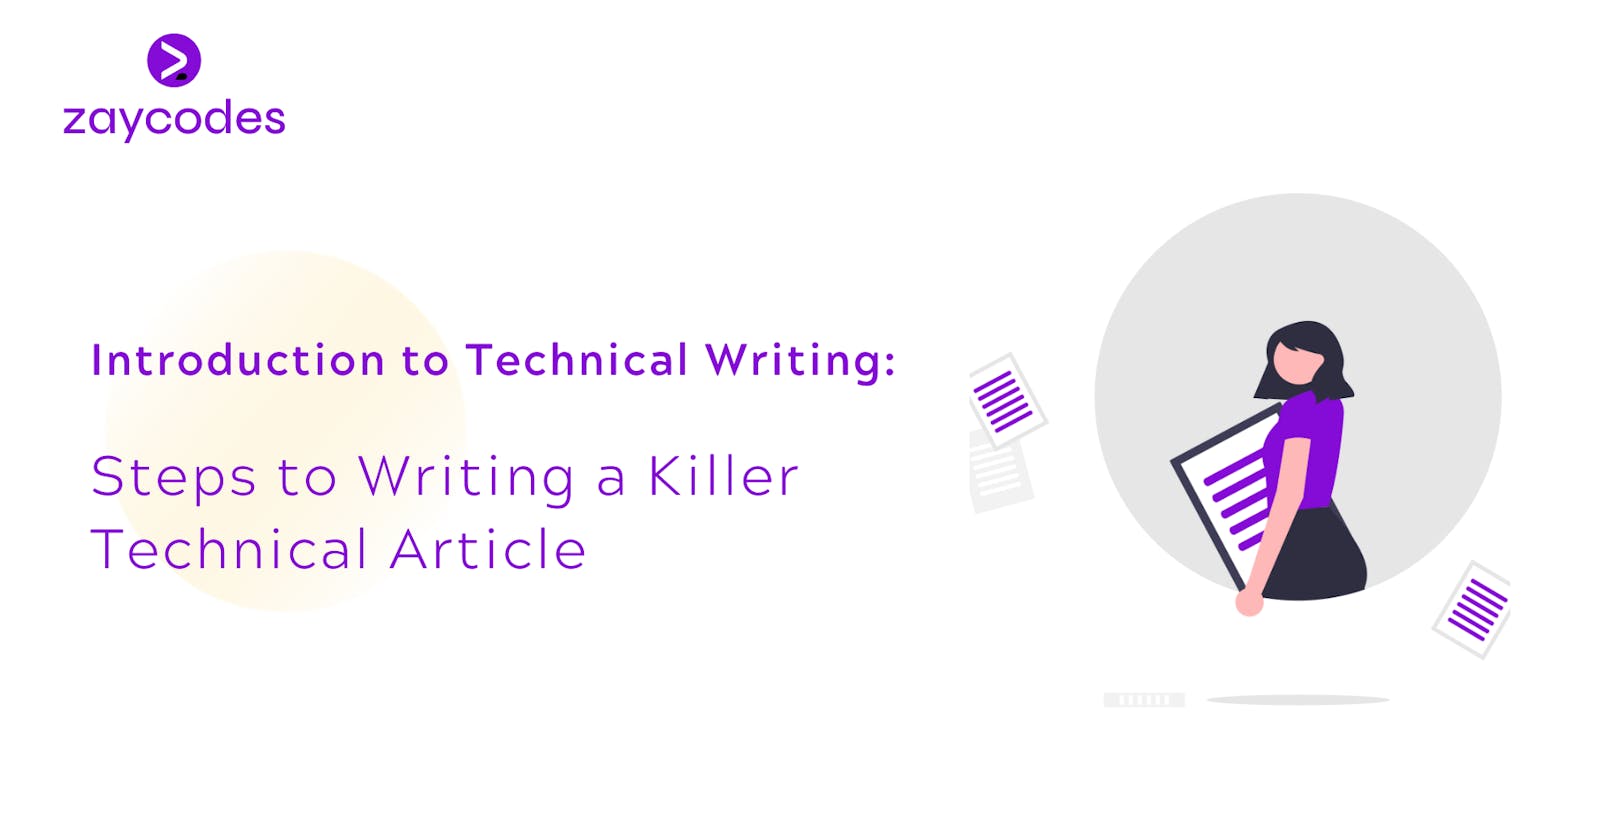 Introduction to Technical Writing: Steps to Writing a Killer Technical Article